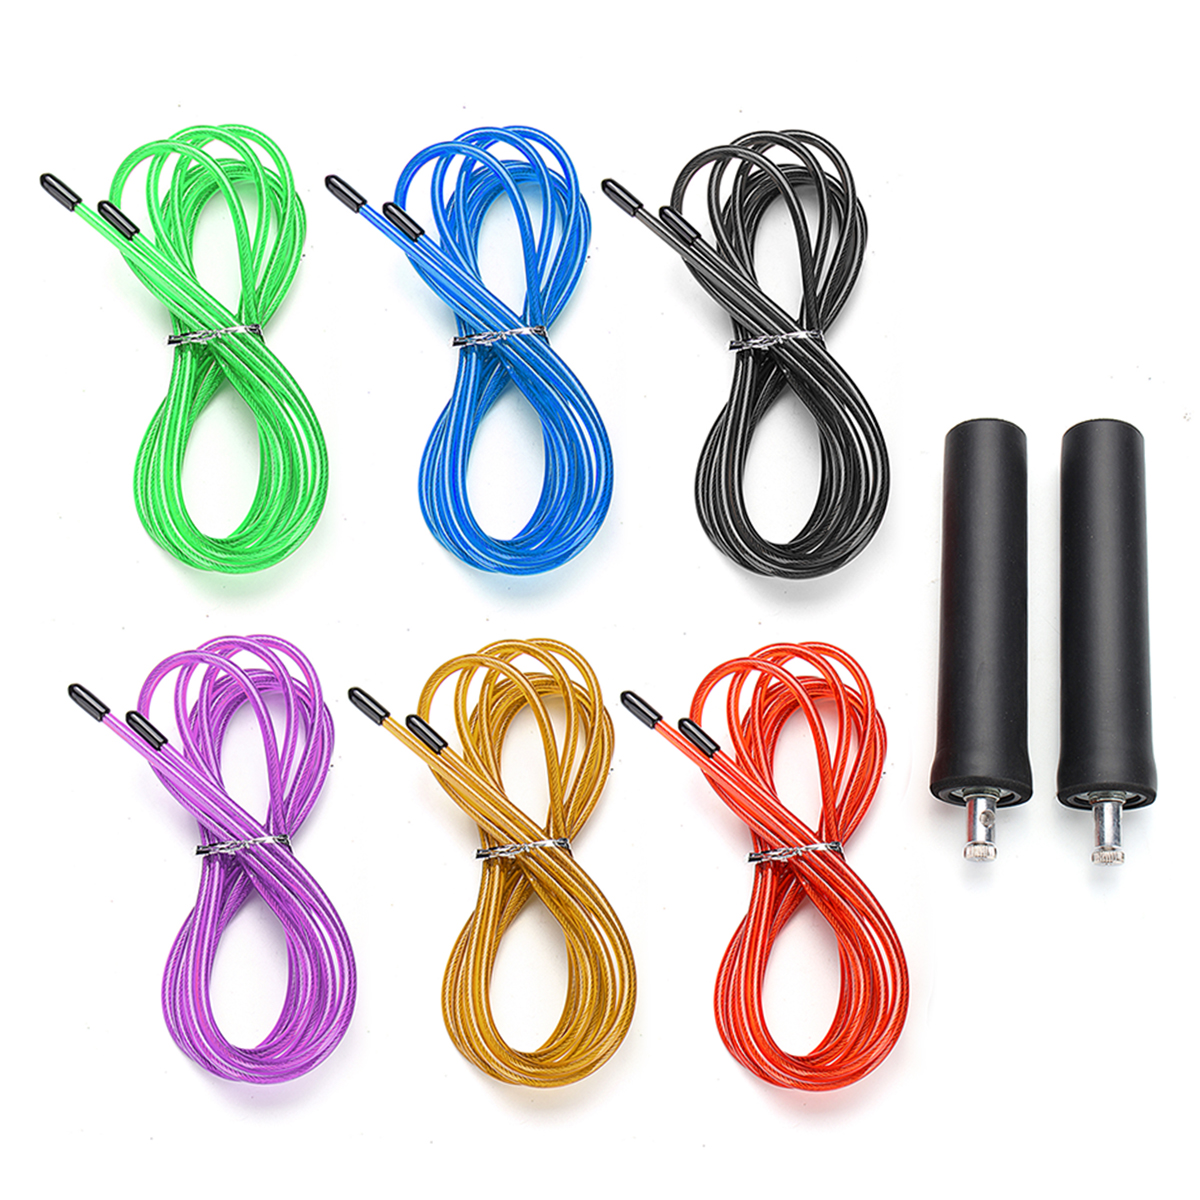 3M-Steel-Wire-Speed-Skipping-Rope-Jumping-Rope-Adjustable-Crossfit-Fitnesss-Exercise-1307727-4